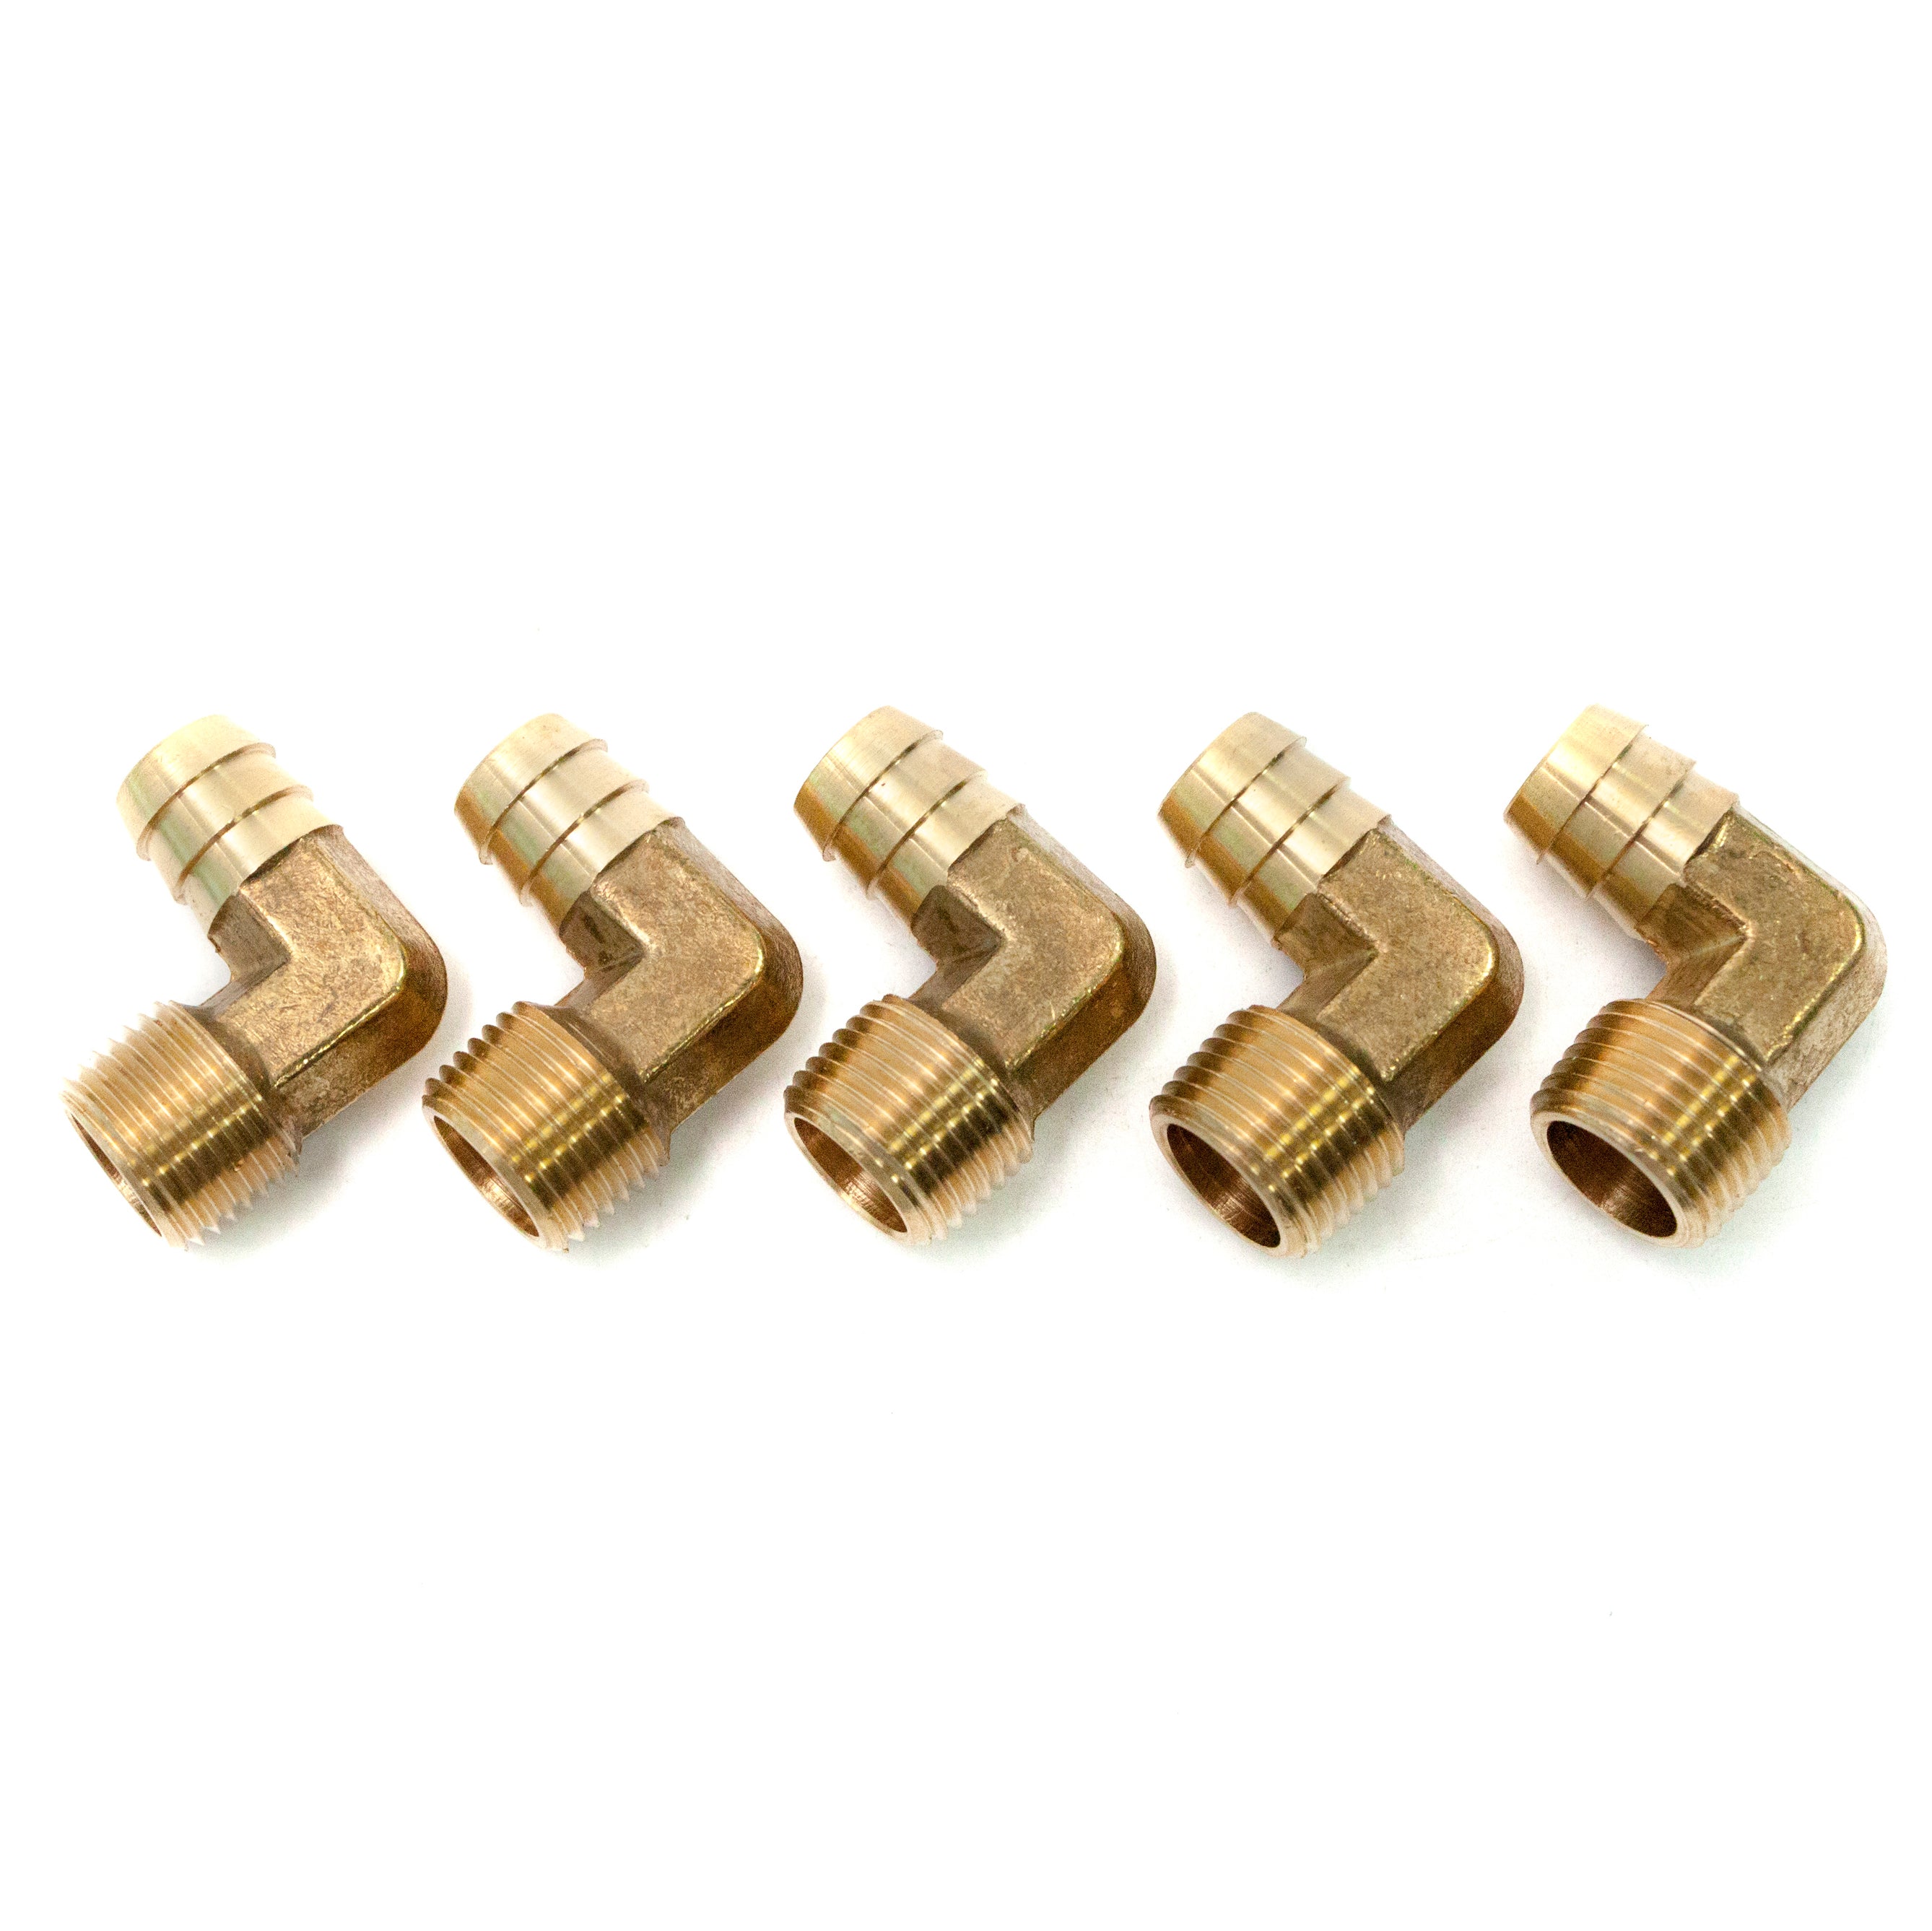 LTWFITTING 90 Degree Elbow Brass Barb Fitting 5/8 ID Hose x 1/2-Inch Male NPT Fuel Boat Air(Pack of 5)